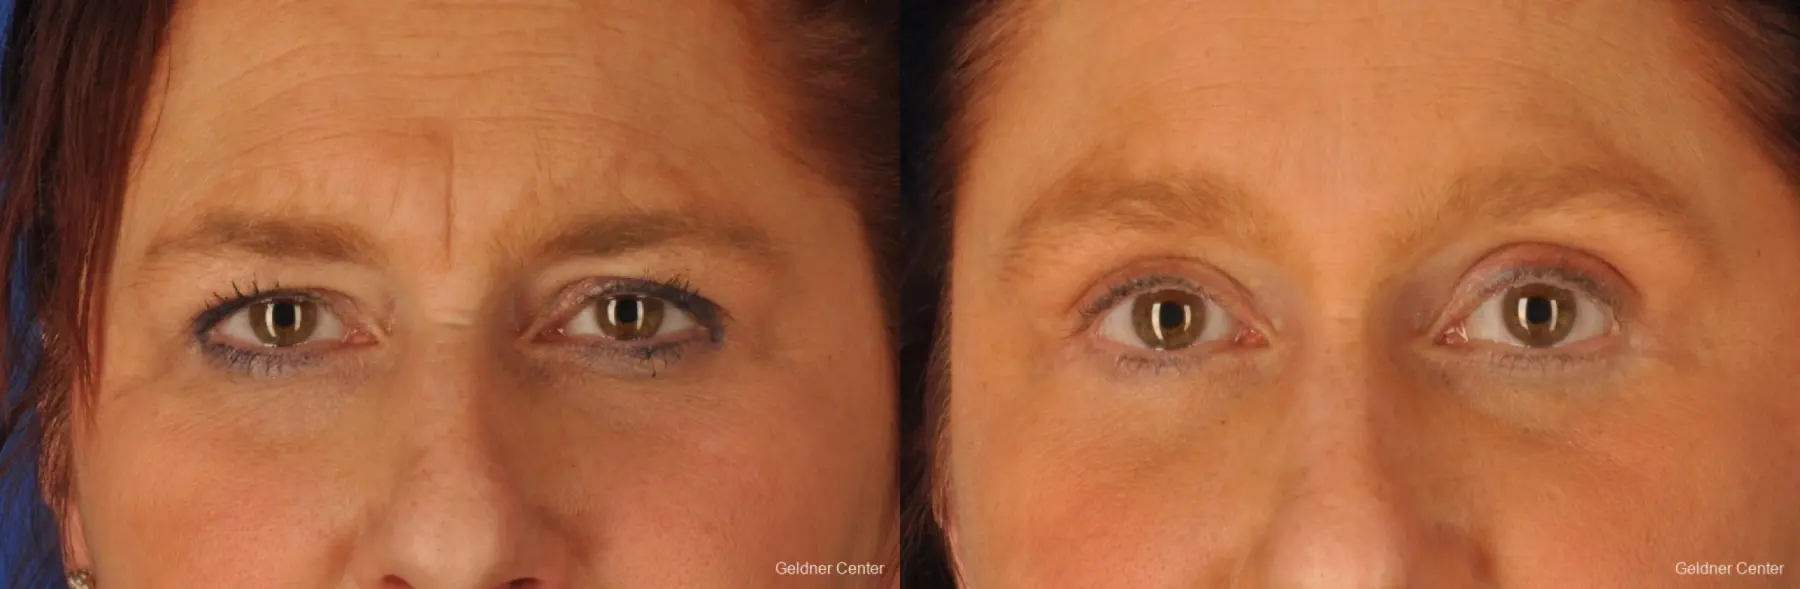 Eyelid Lift: Patient 7 - Before and After  